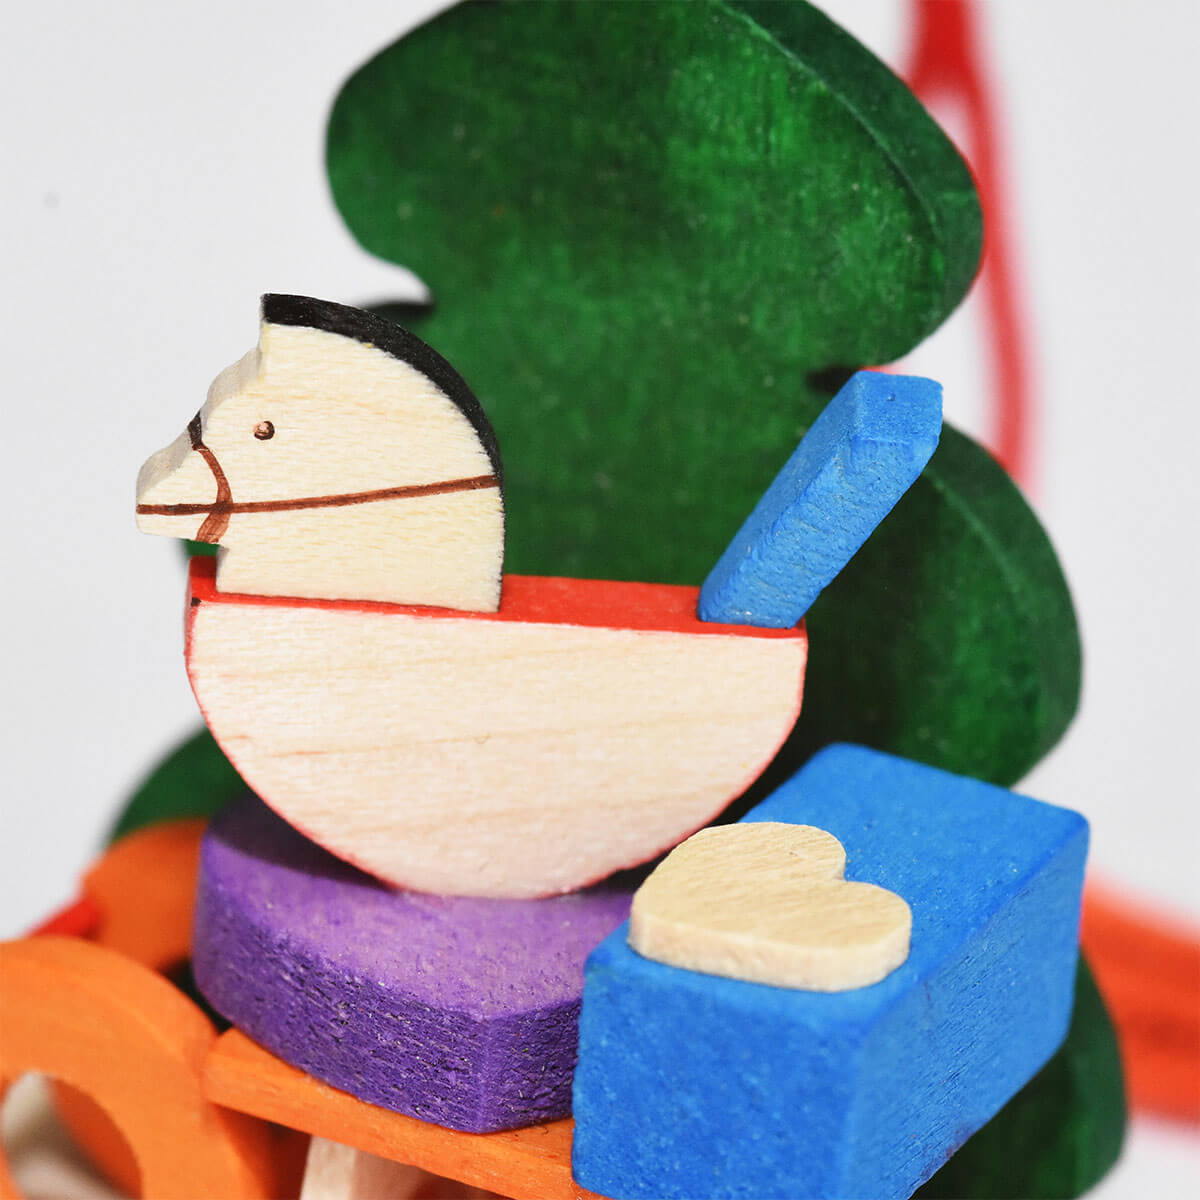 Christmas Tree & Gifts Ornament with bird house